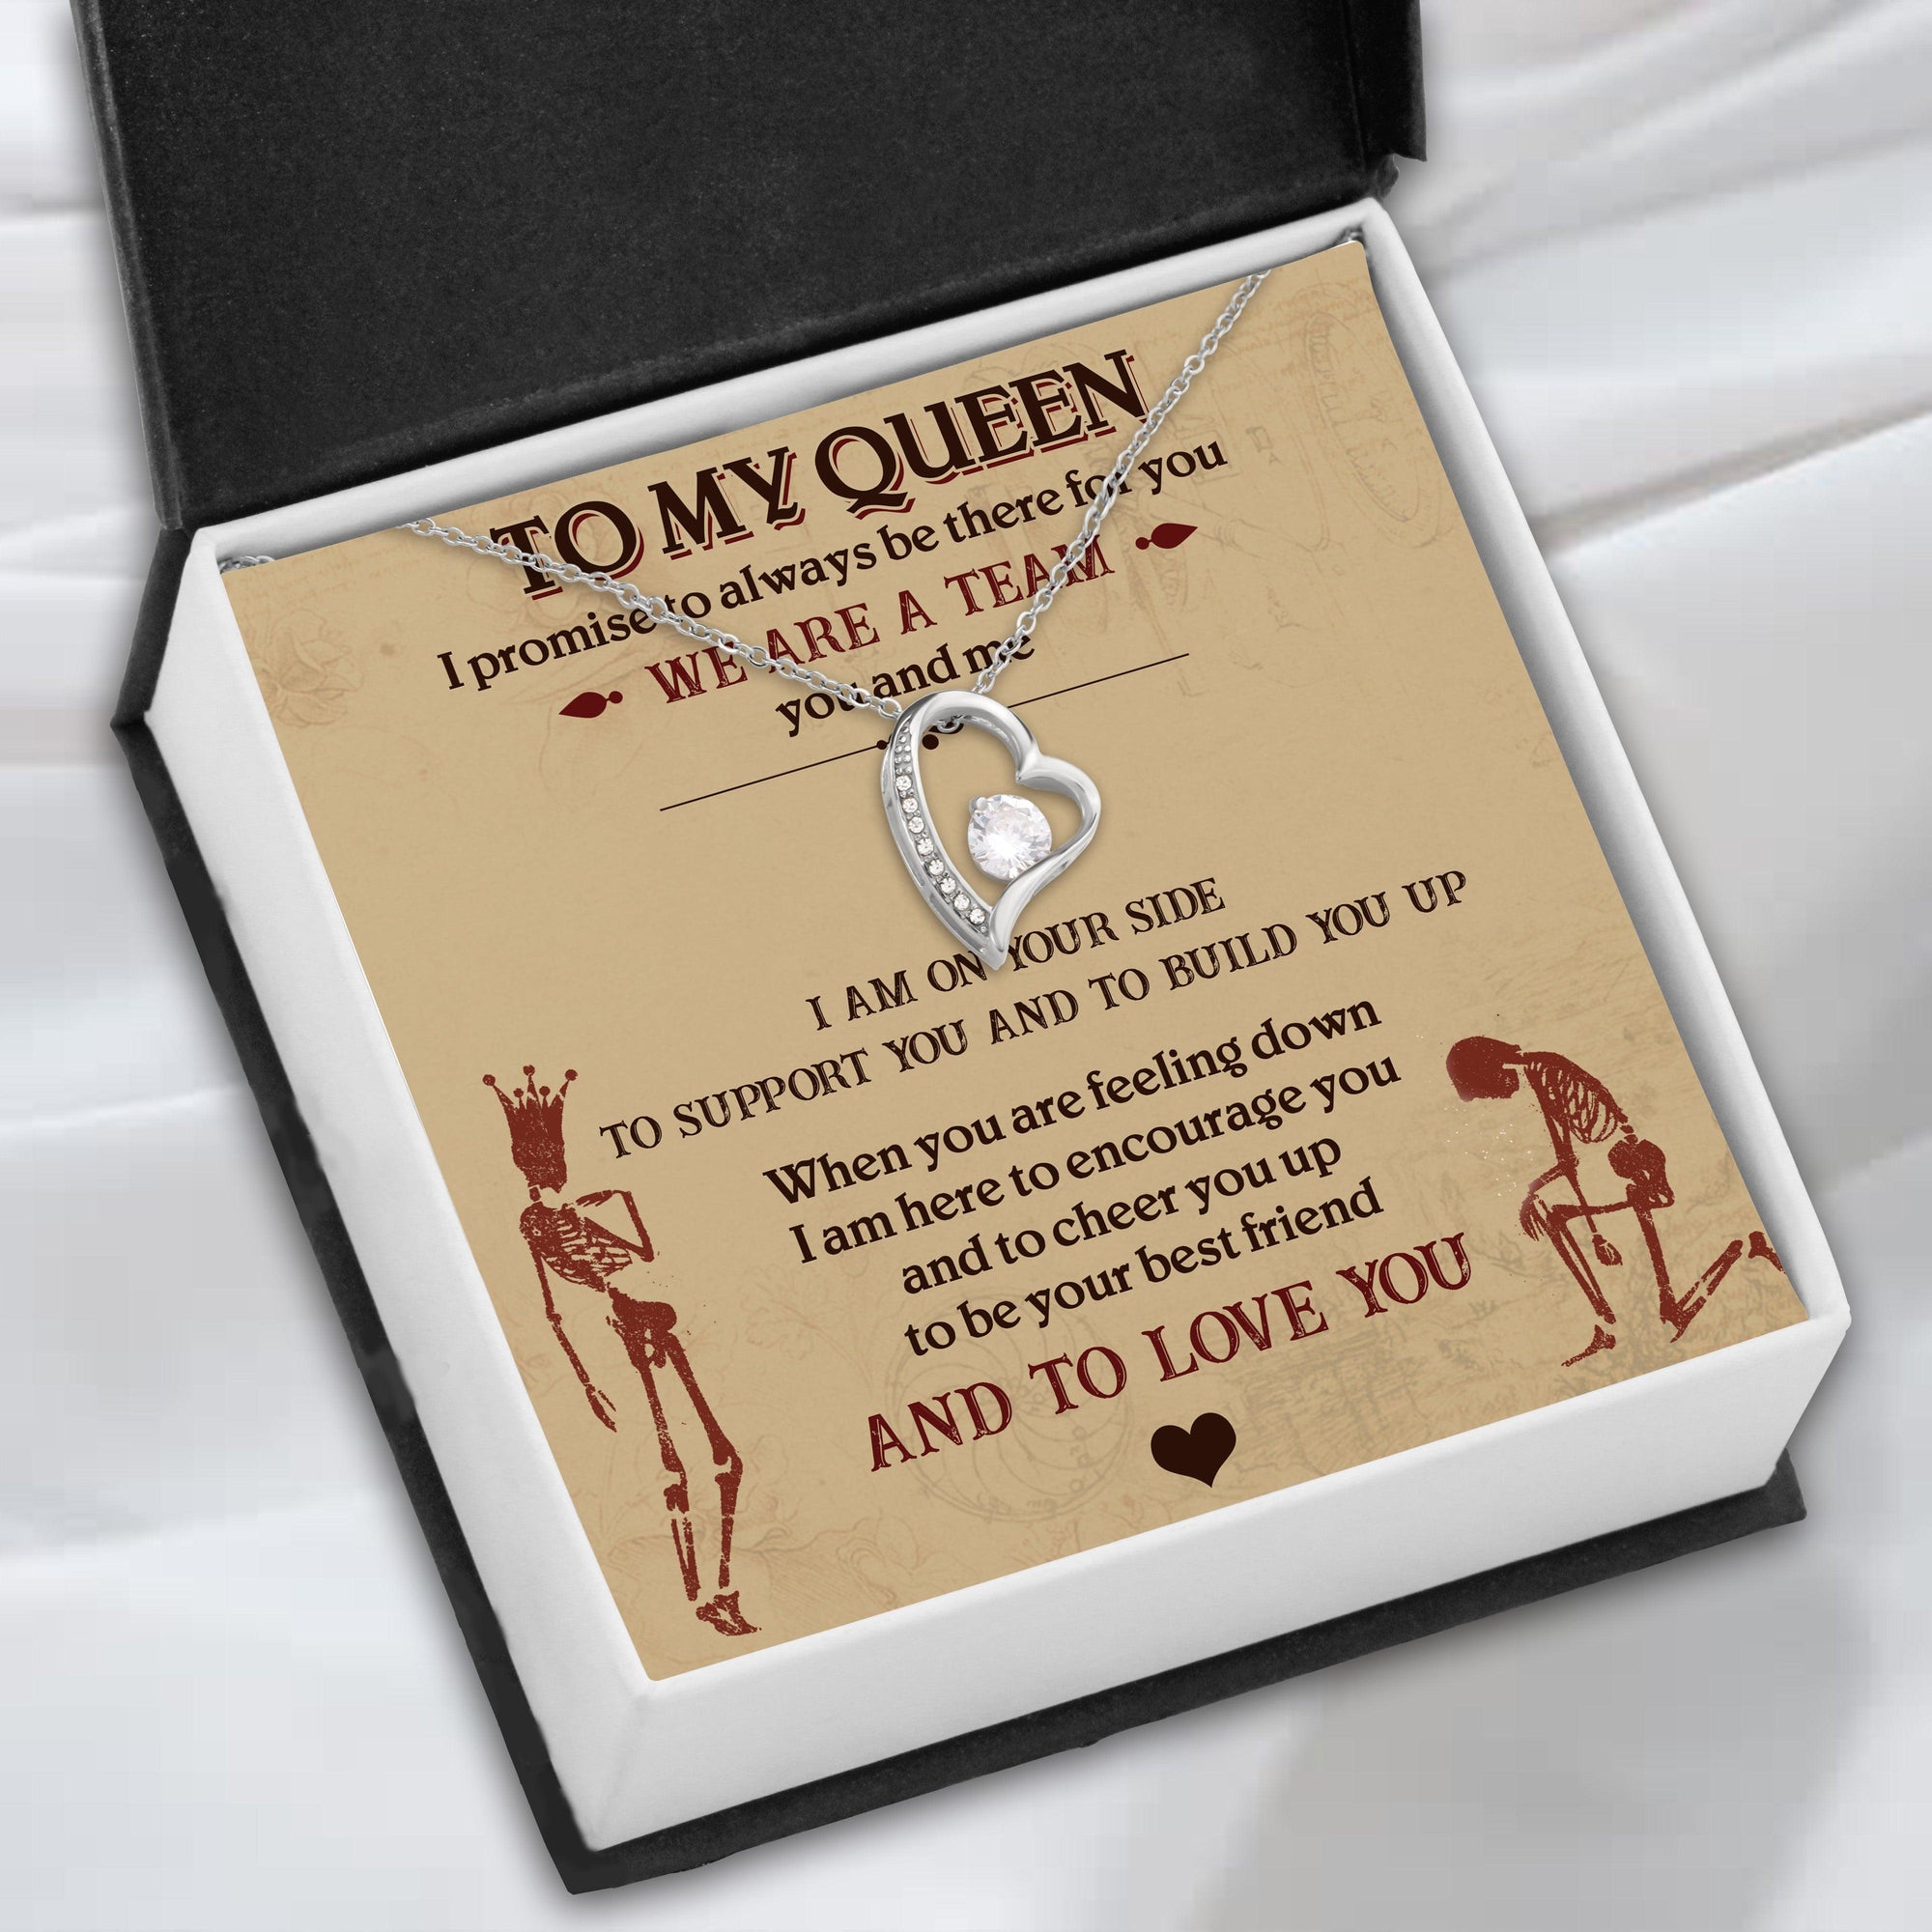 Forever Love Necklace - Skull - To My Queen - And To Love You - Ausnr13011 - Gifts Holder